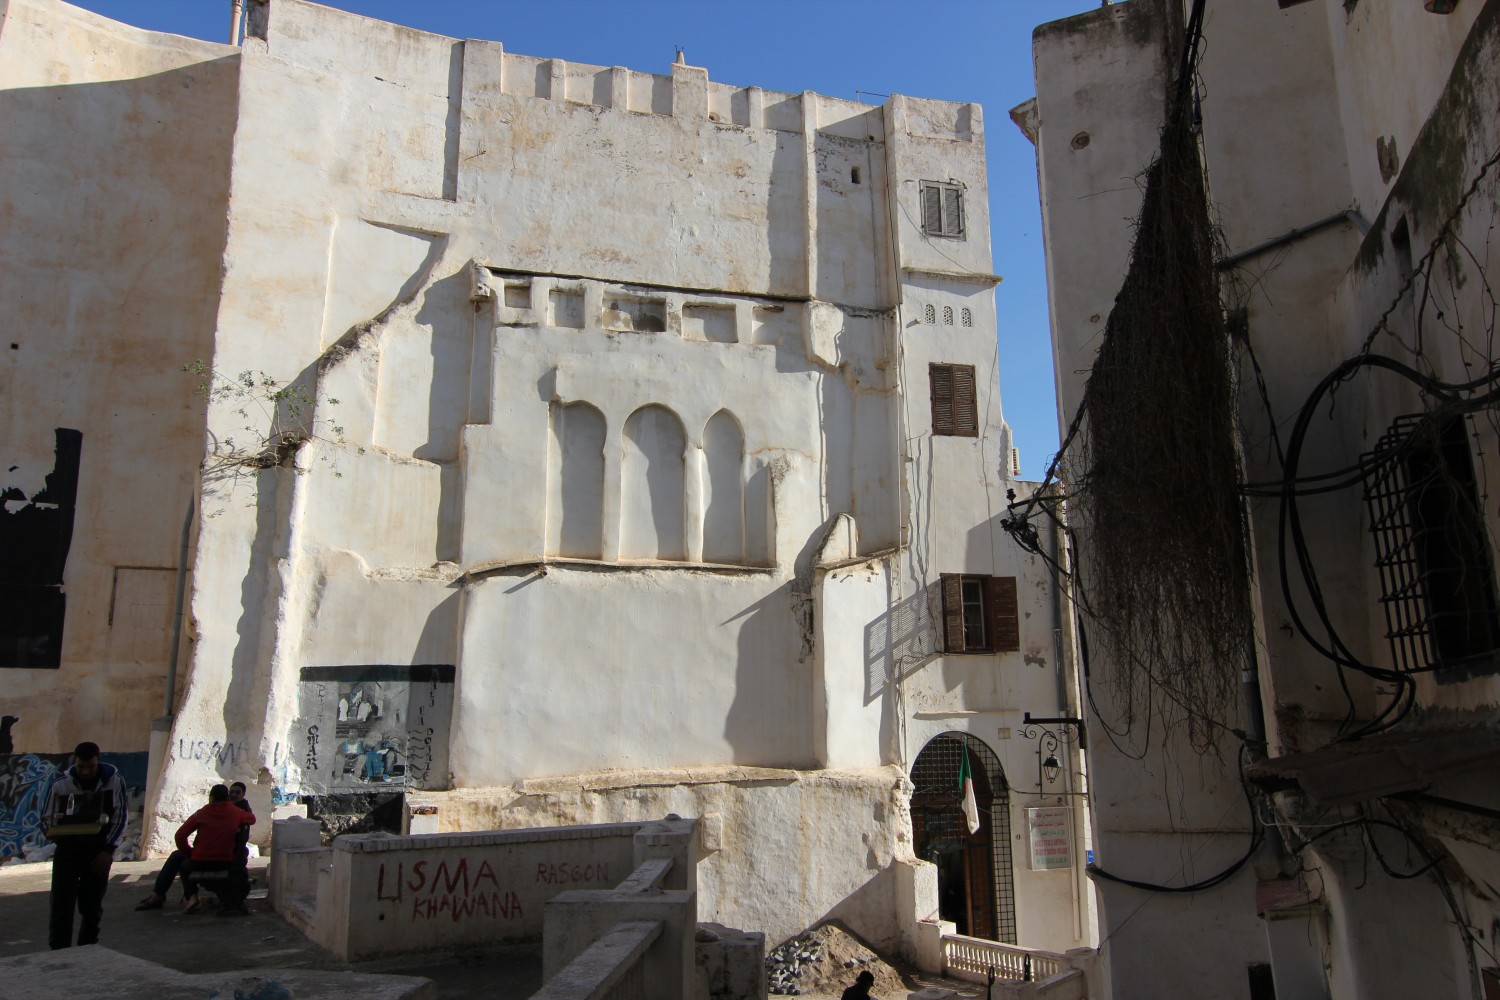 Rue Mohamed Akli Malek, exterior view of Dar Bakri showing remnants of alcoves and niches